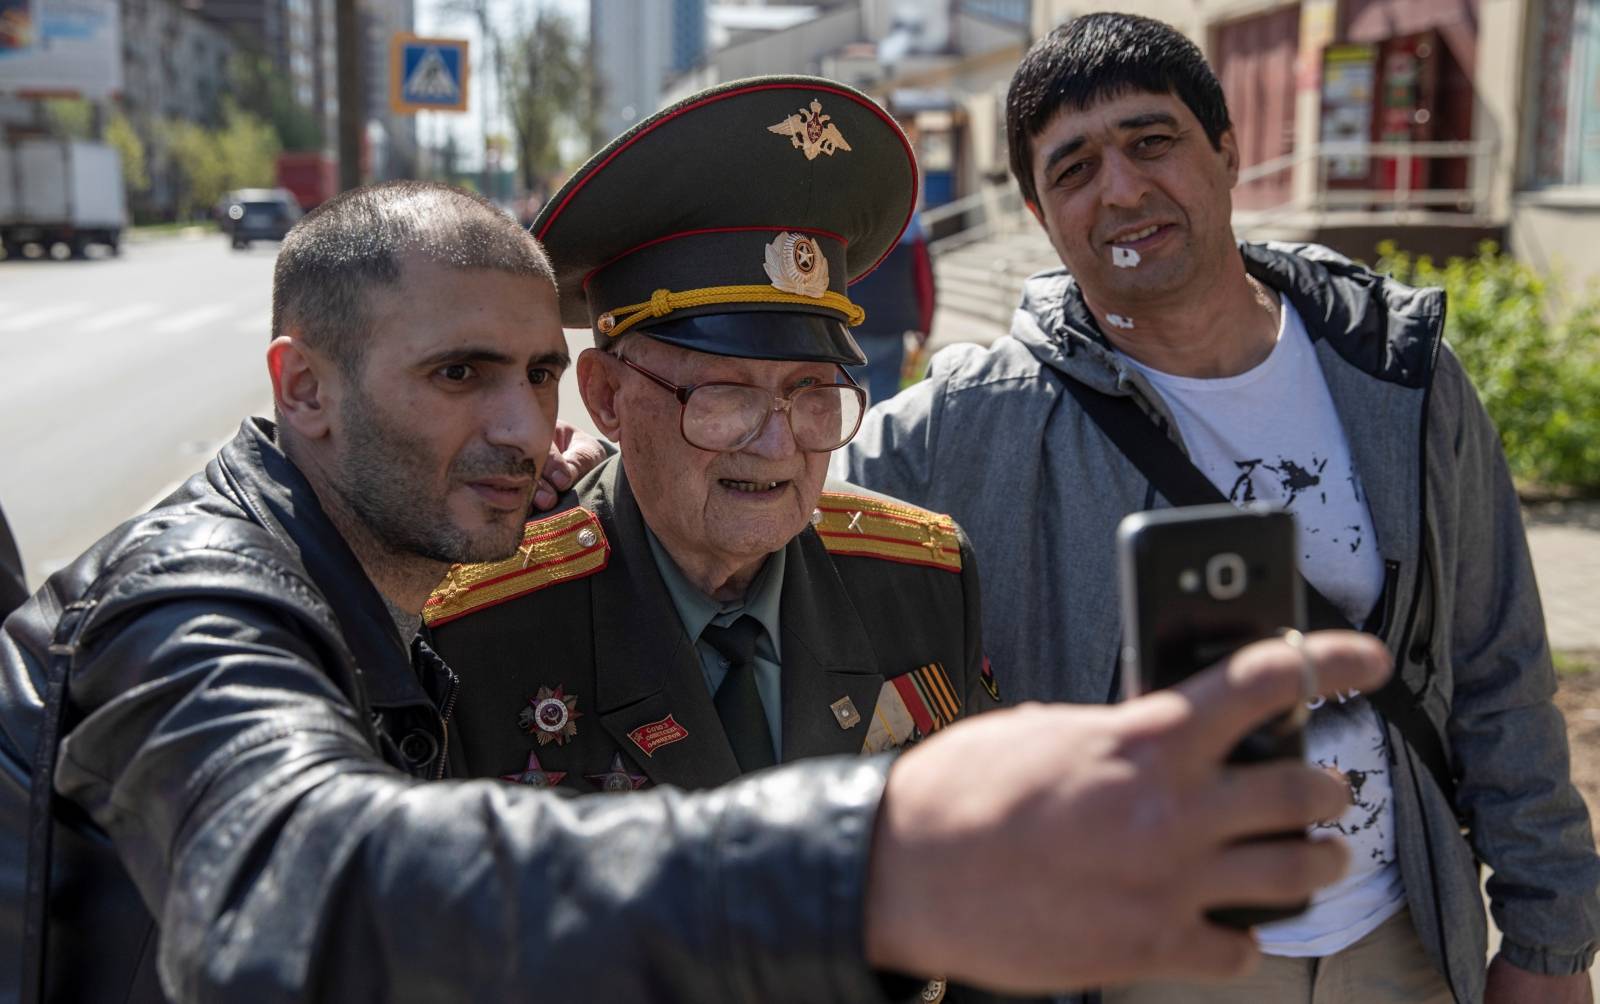 The Wider Image: Russian WW2 veteran, 100, calls for peace on Victory Day